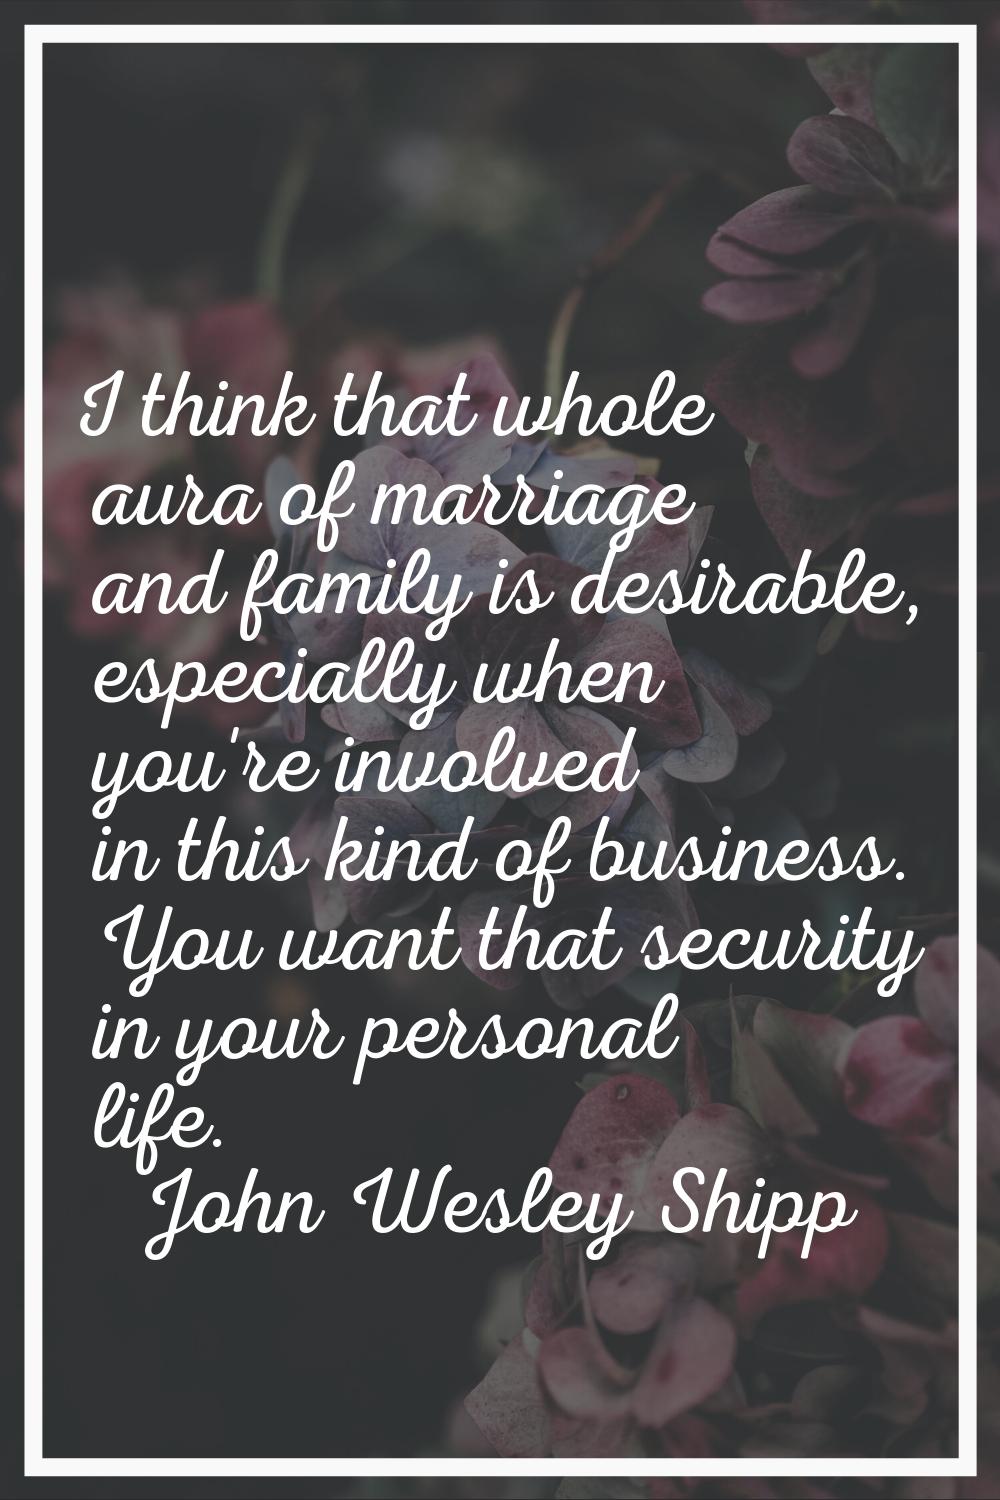 I think that whole aura of marriage and family is desirable, especially when you're involved in thi